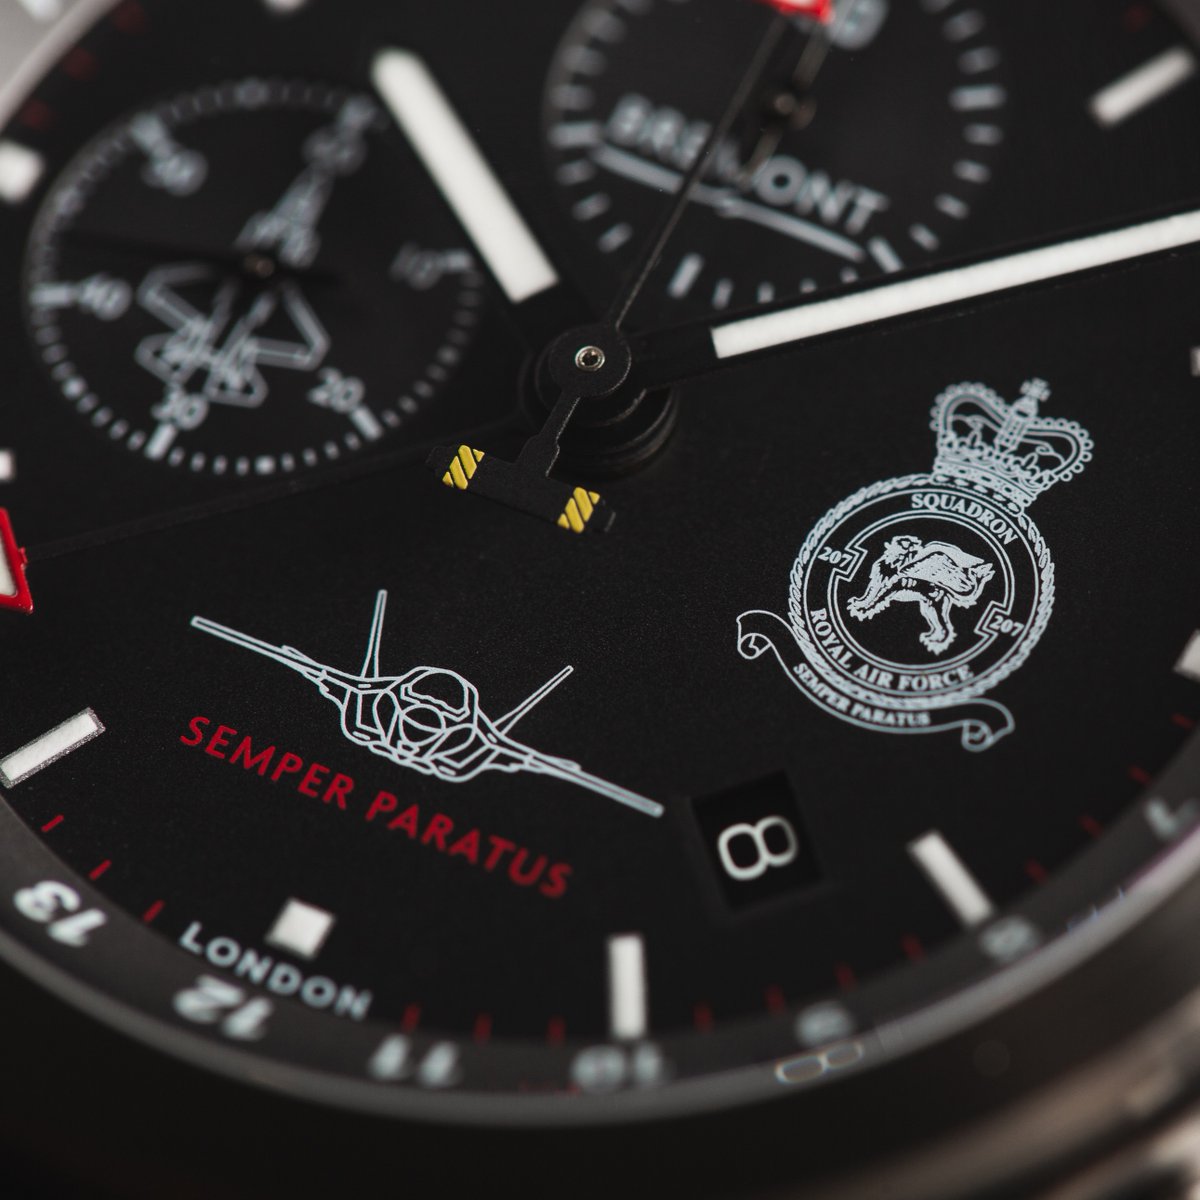 Swipe to see more of the Bremont ALT1-ZT F-35B 207 Sqn Watch This timepiece is customised with details of the 207 Squadron, the iconic F-35B 'Lightning II' aircraft and is exclusively available to 207 members. To enquire, email military@bremont.com #Bremont #207sqn